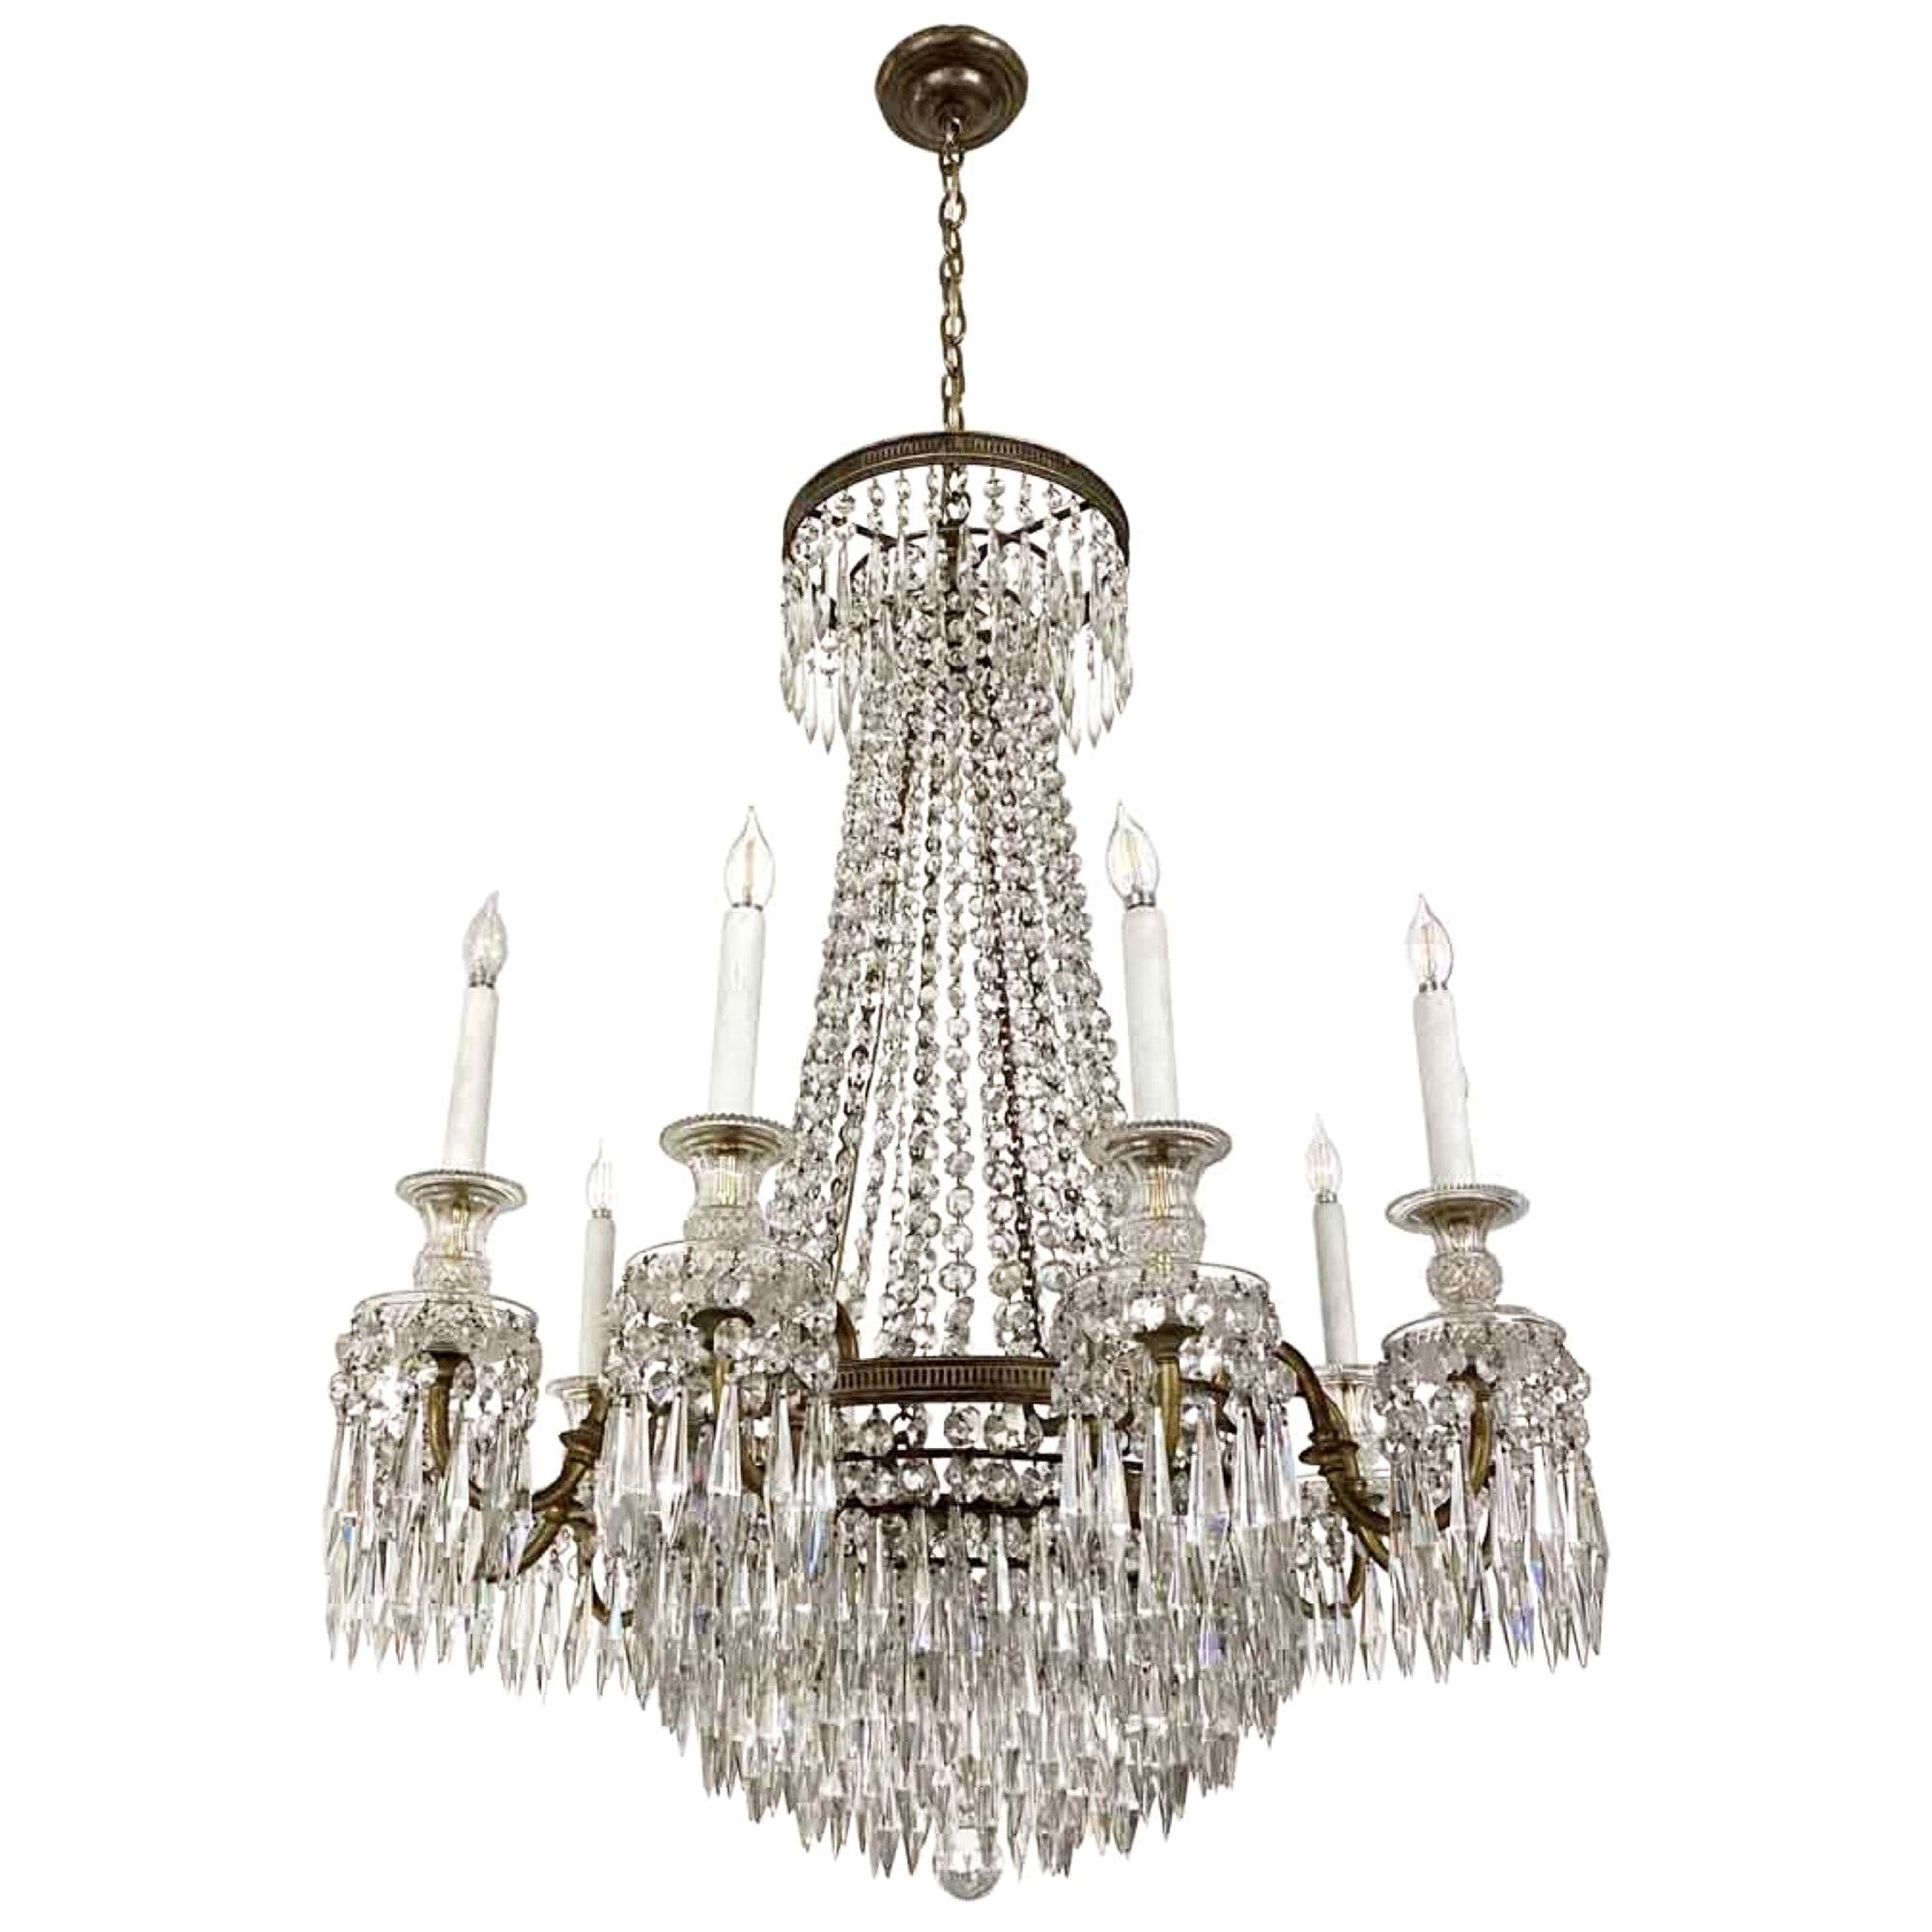 1920s French Regency Crystal and Bronze Chandelier Antique with Hand Cut Crystal